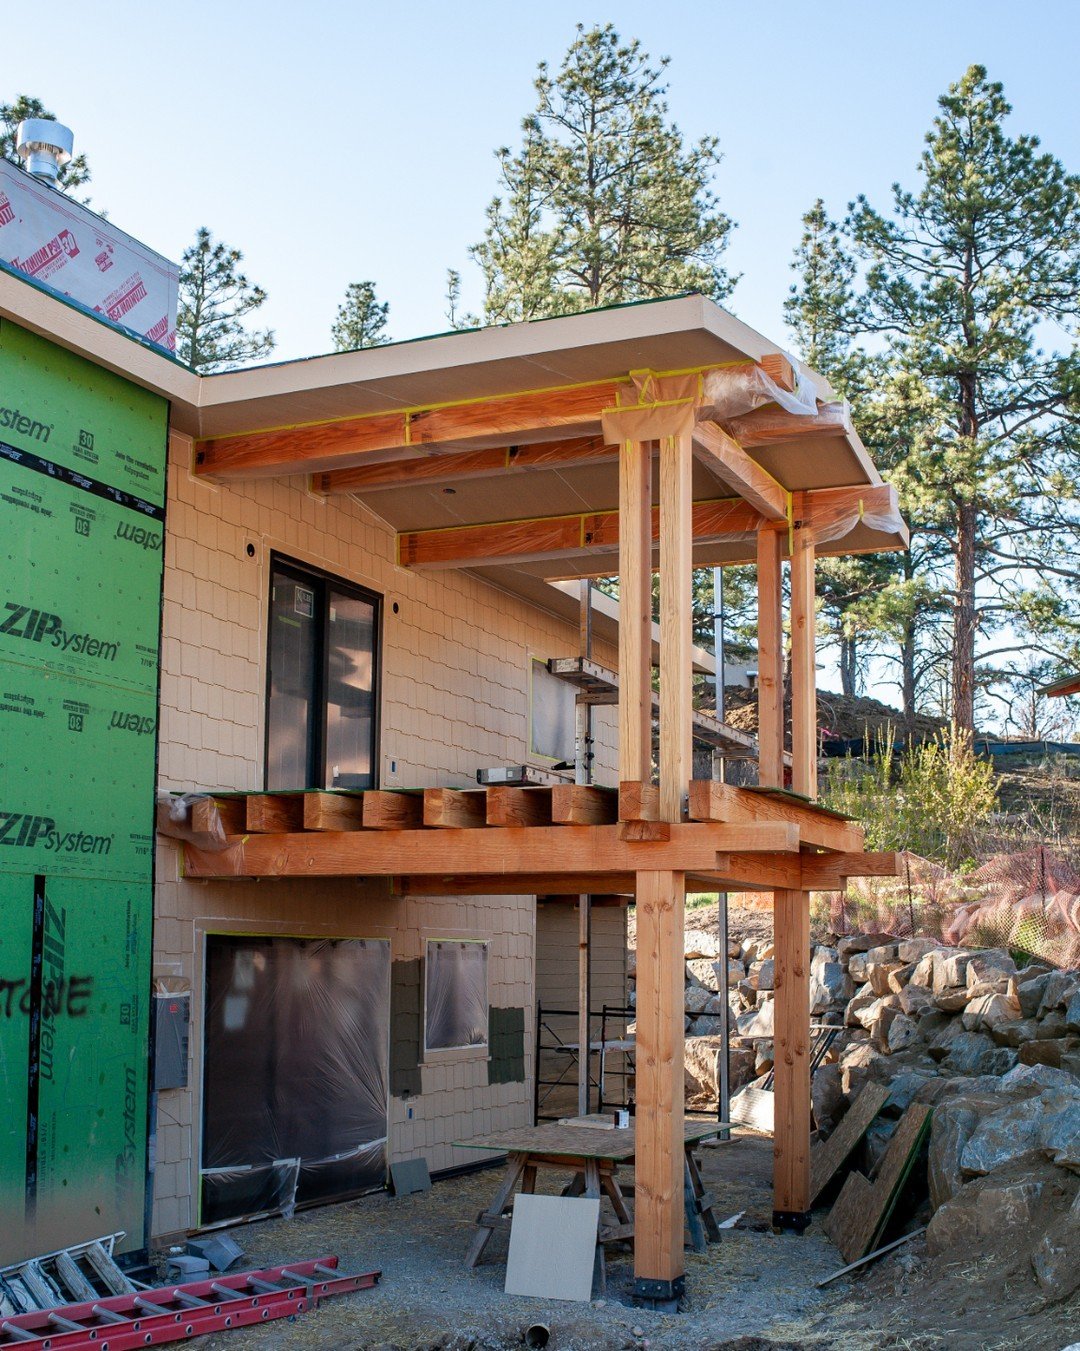 A side deck that is going to be the perfect spot for morning coffees and sunset views. 😊

#homebuilder #designbuild #customhomebuilder #newconstruction #customhomedesign #mountainhome #swcolorado